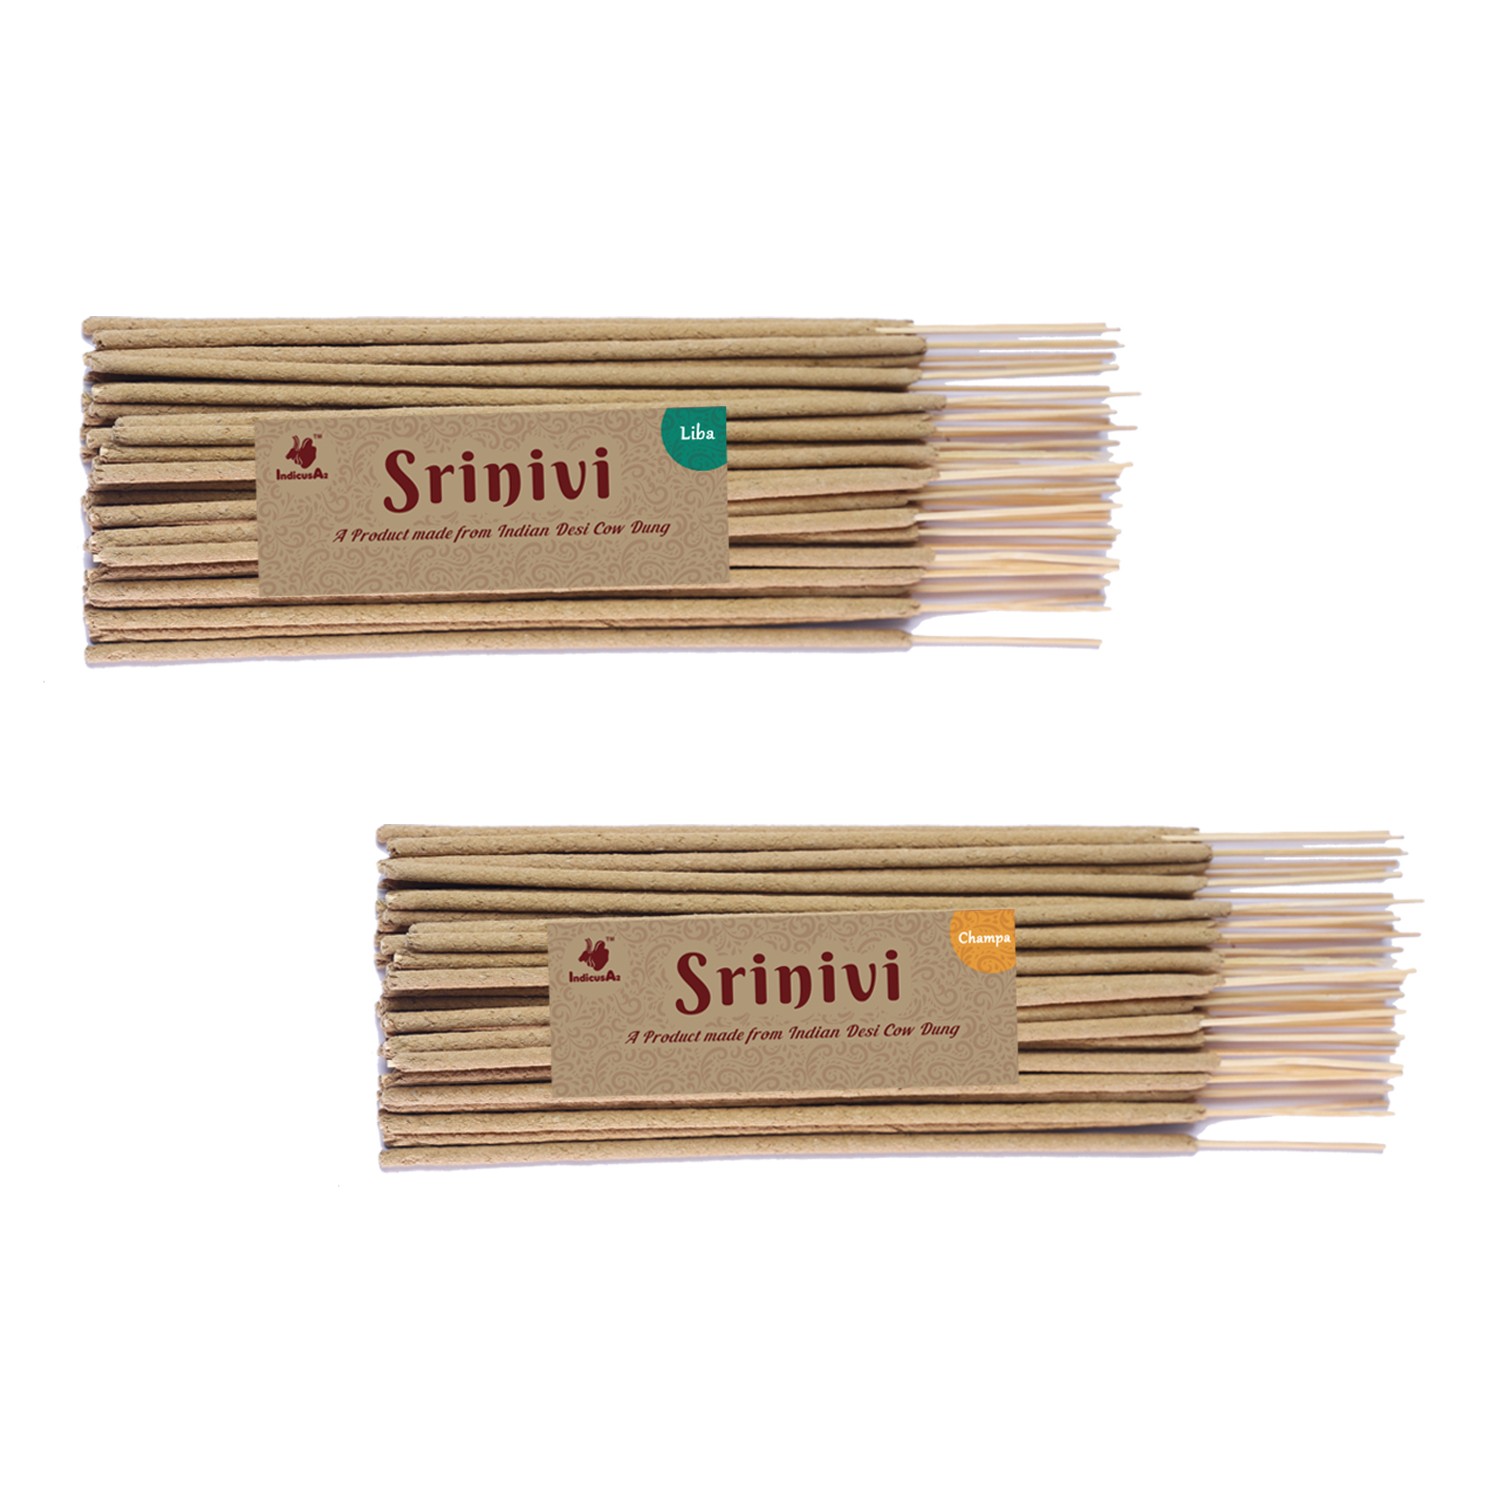 Srinivi Agarbattis - Made up of desi cow dung|Pack of 2|Each pack consists of 35 sticks|Fragrance – Liba, Champa.